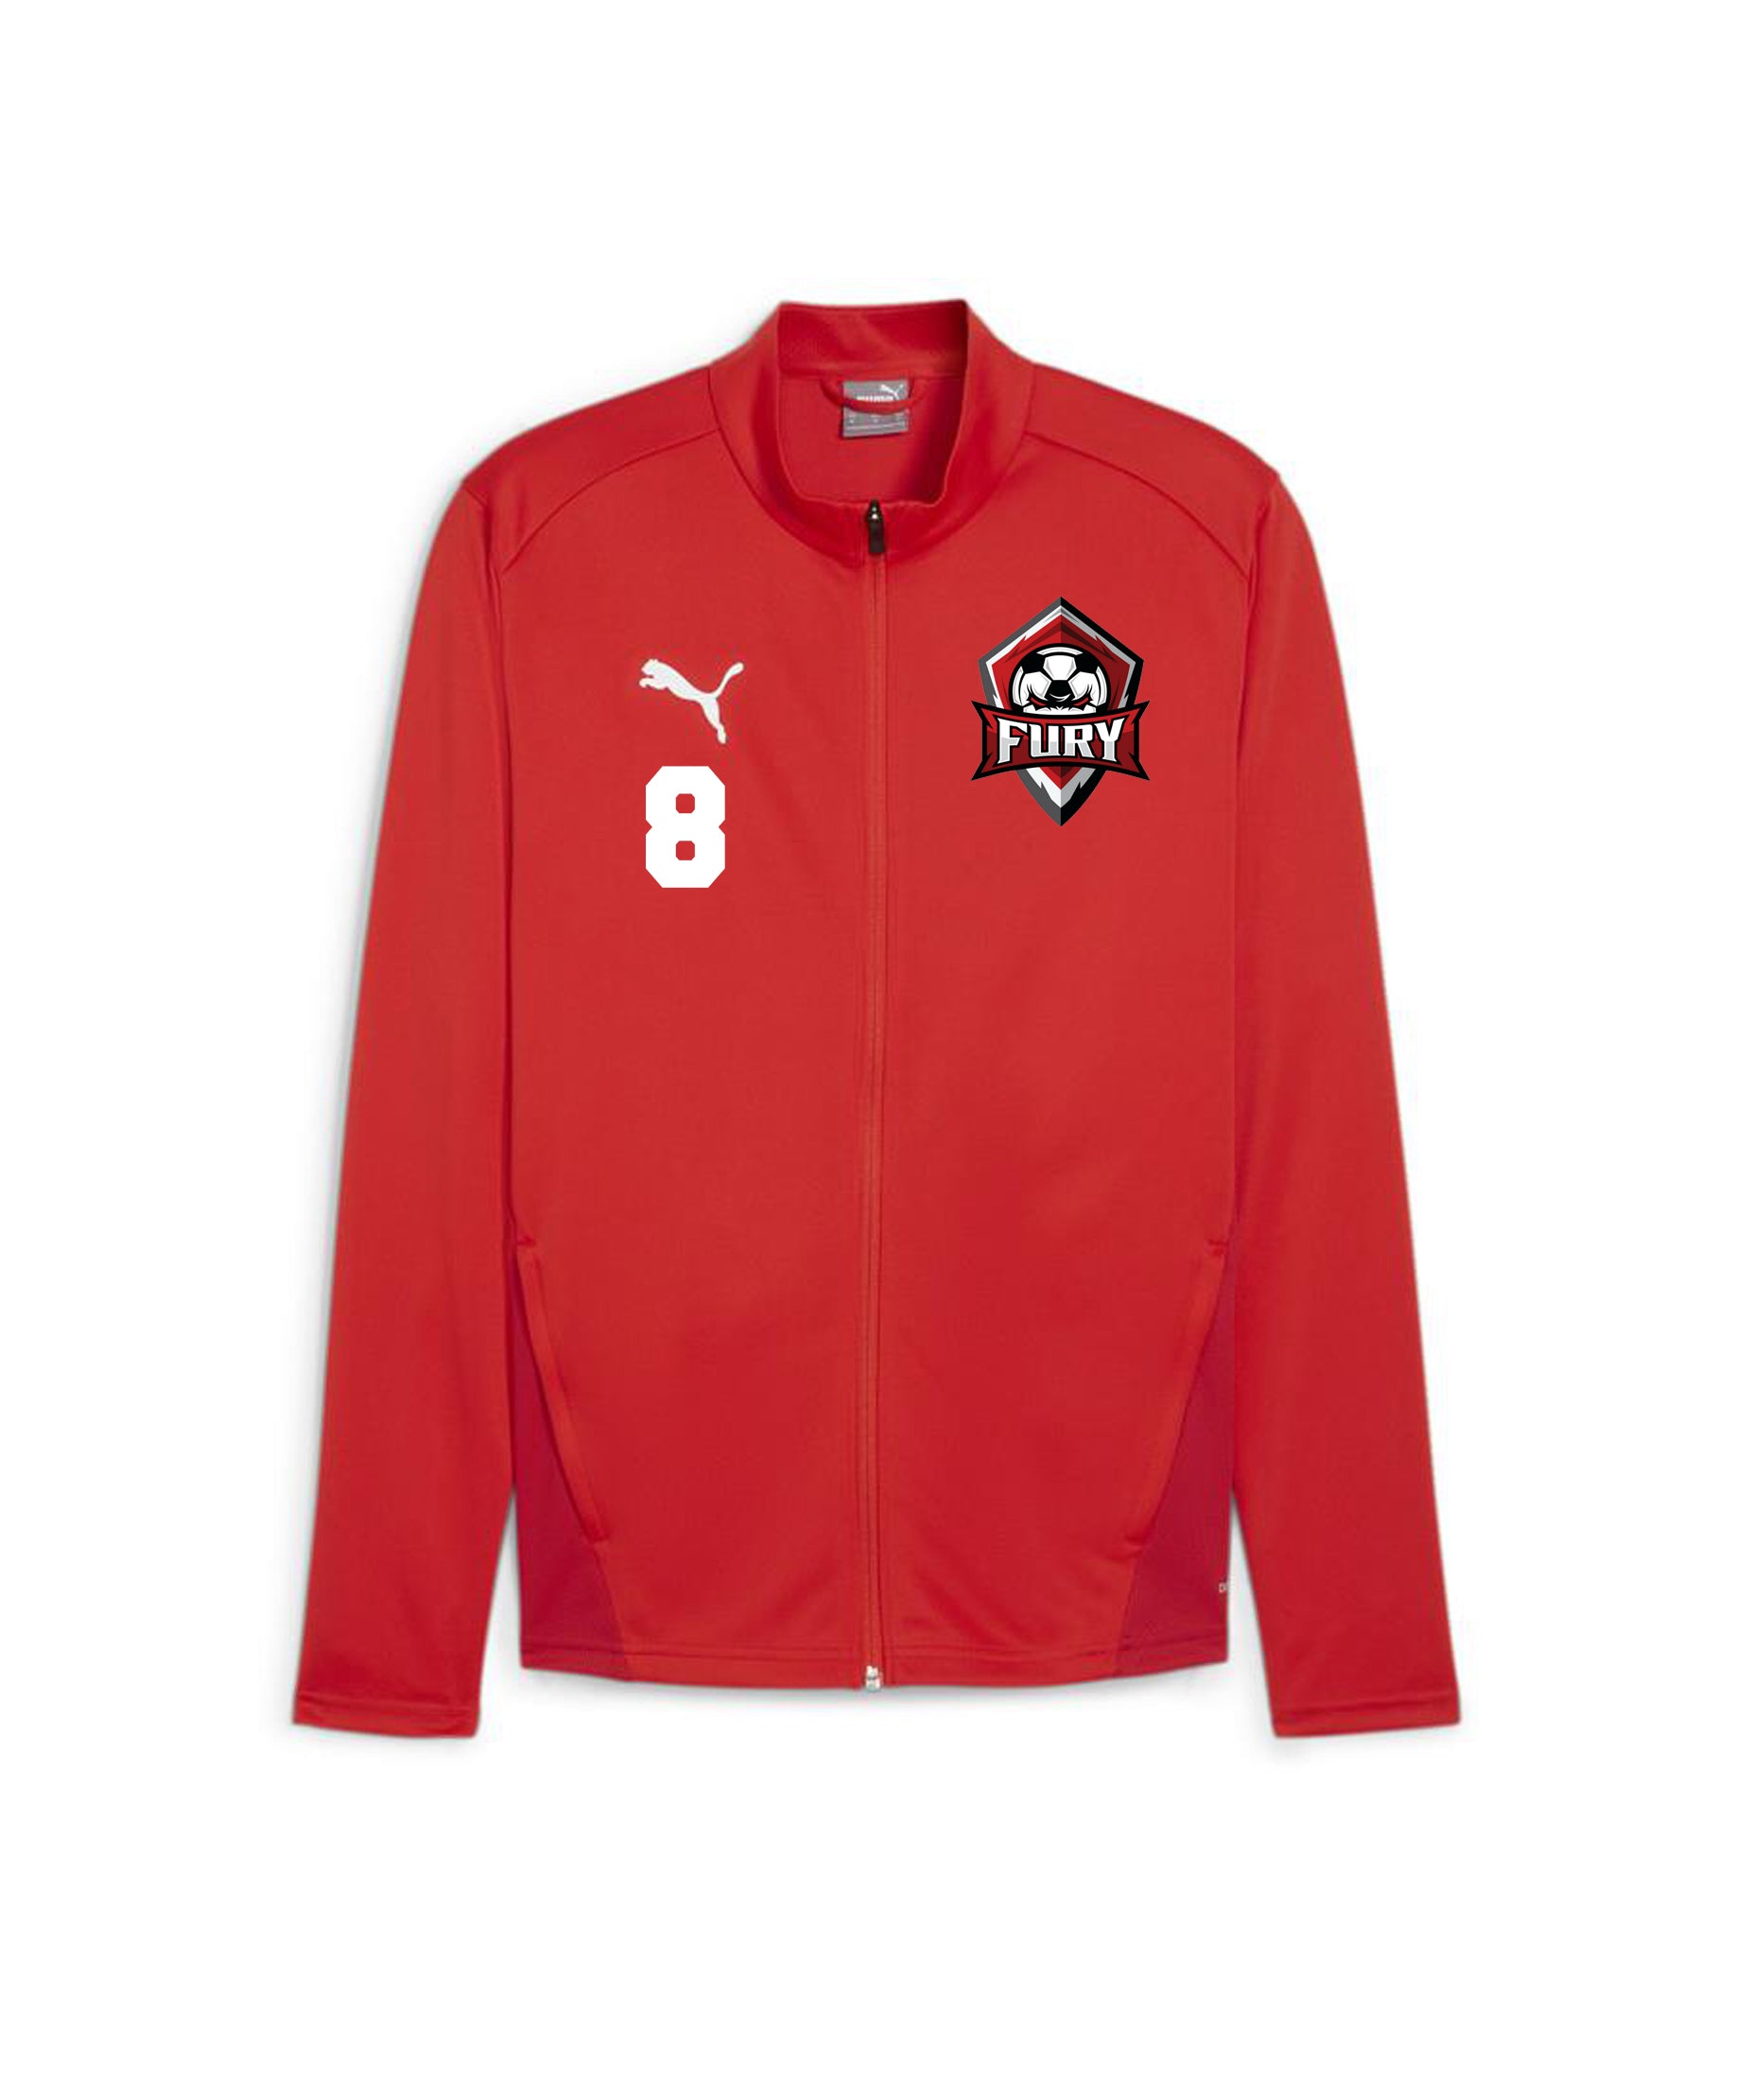 FURY FC YOUTH AND MEN'S PUMA TEAM GOAL TRAINING JACKET - RED